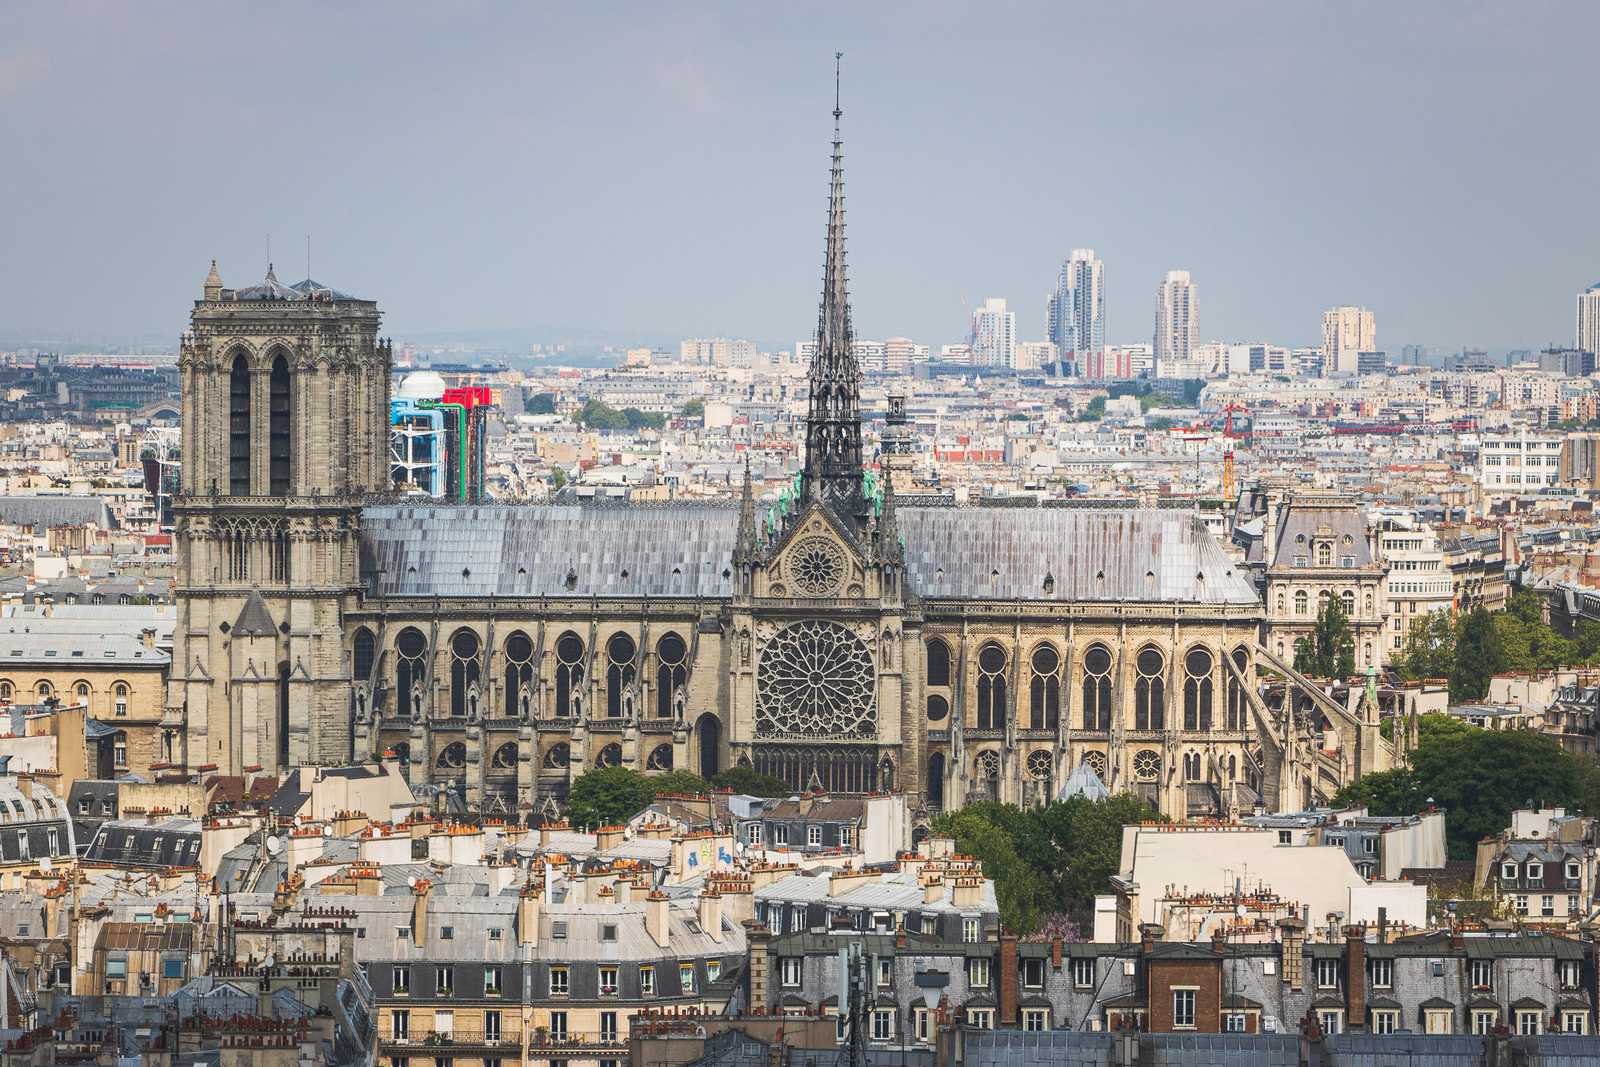 A view from slightly above the iconic towers and spire of Notre Dame, a large gothic cathedral towering above and surrounded by the smaller buildings of Central Paris